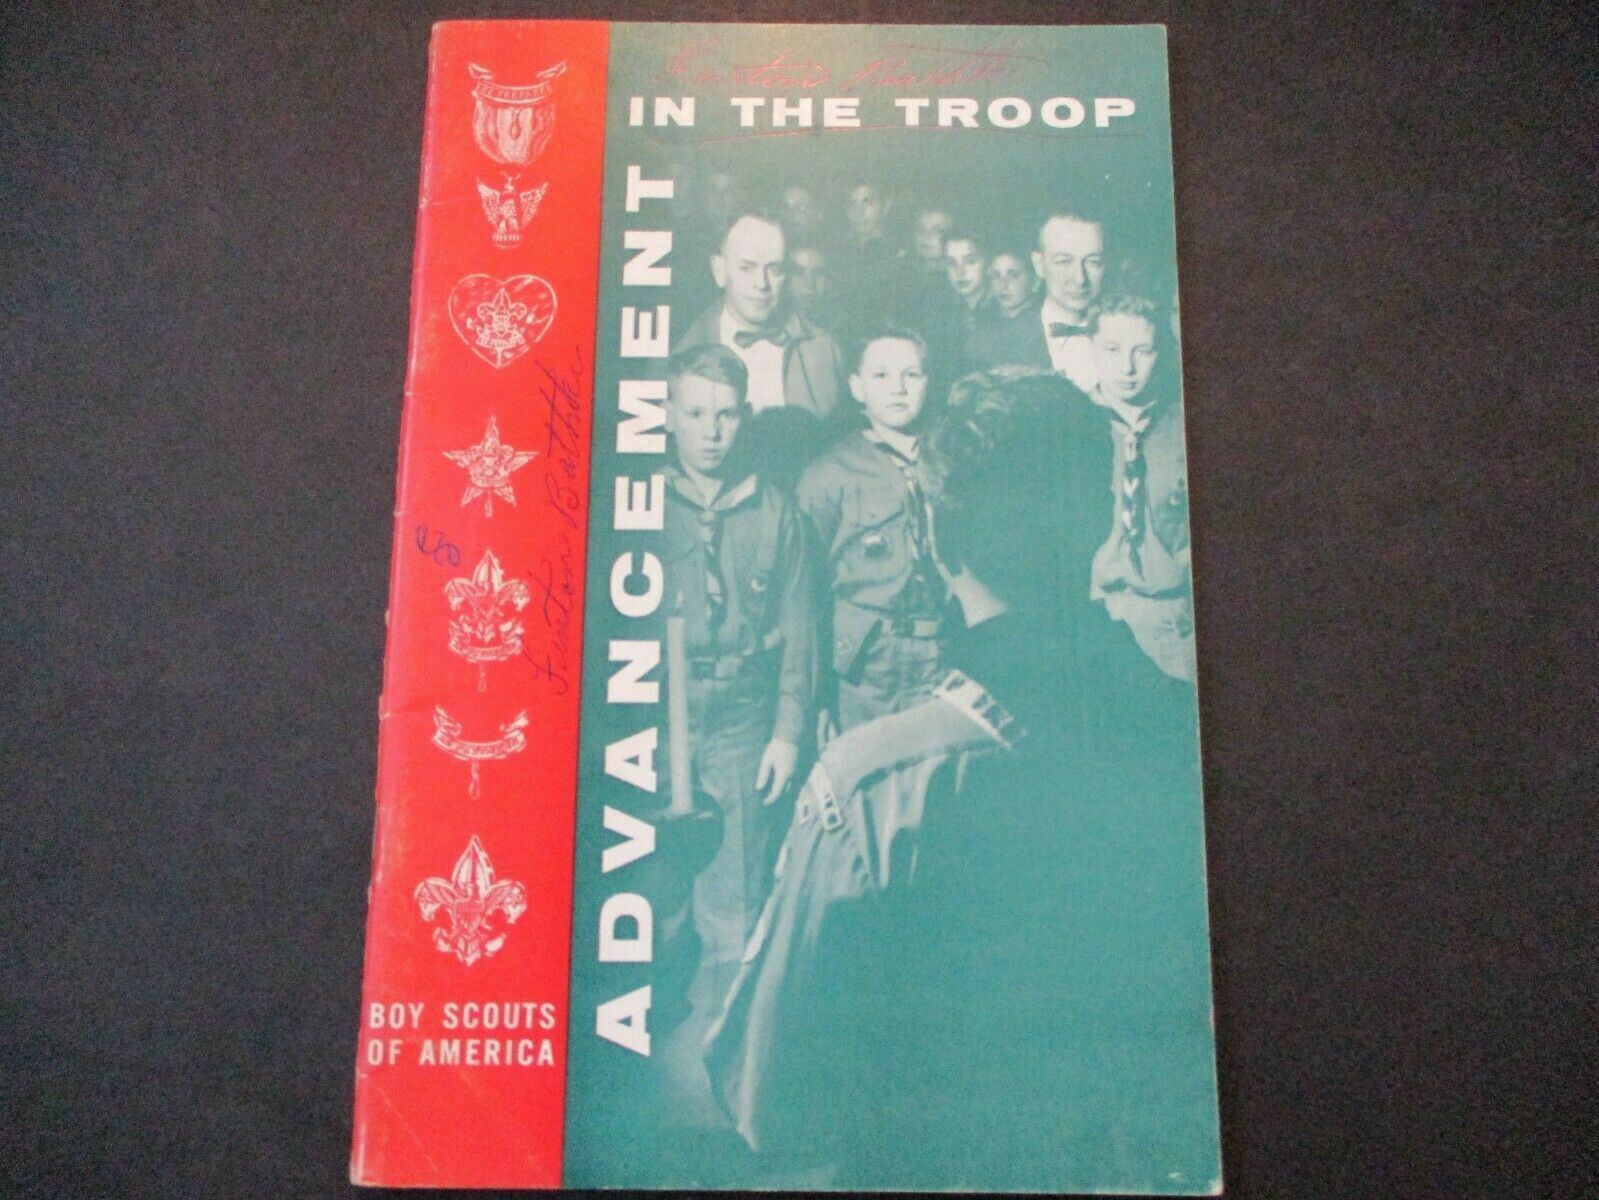 1965 Advancement In The Troop BSA boy scout book